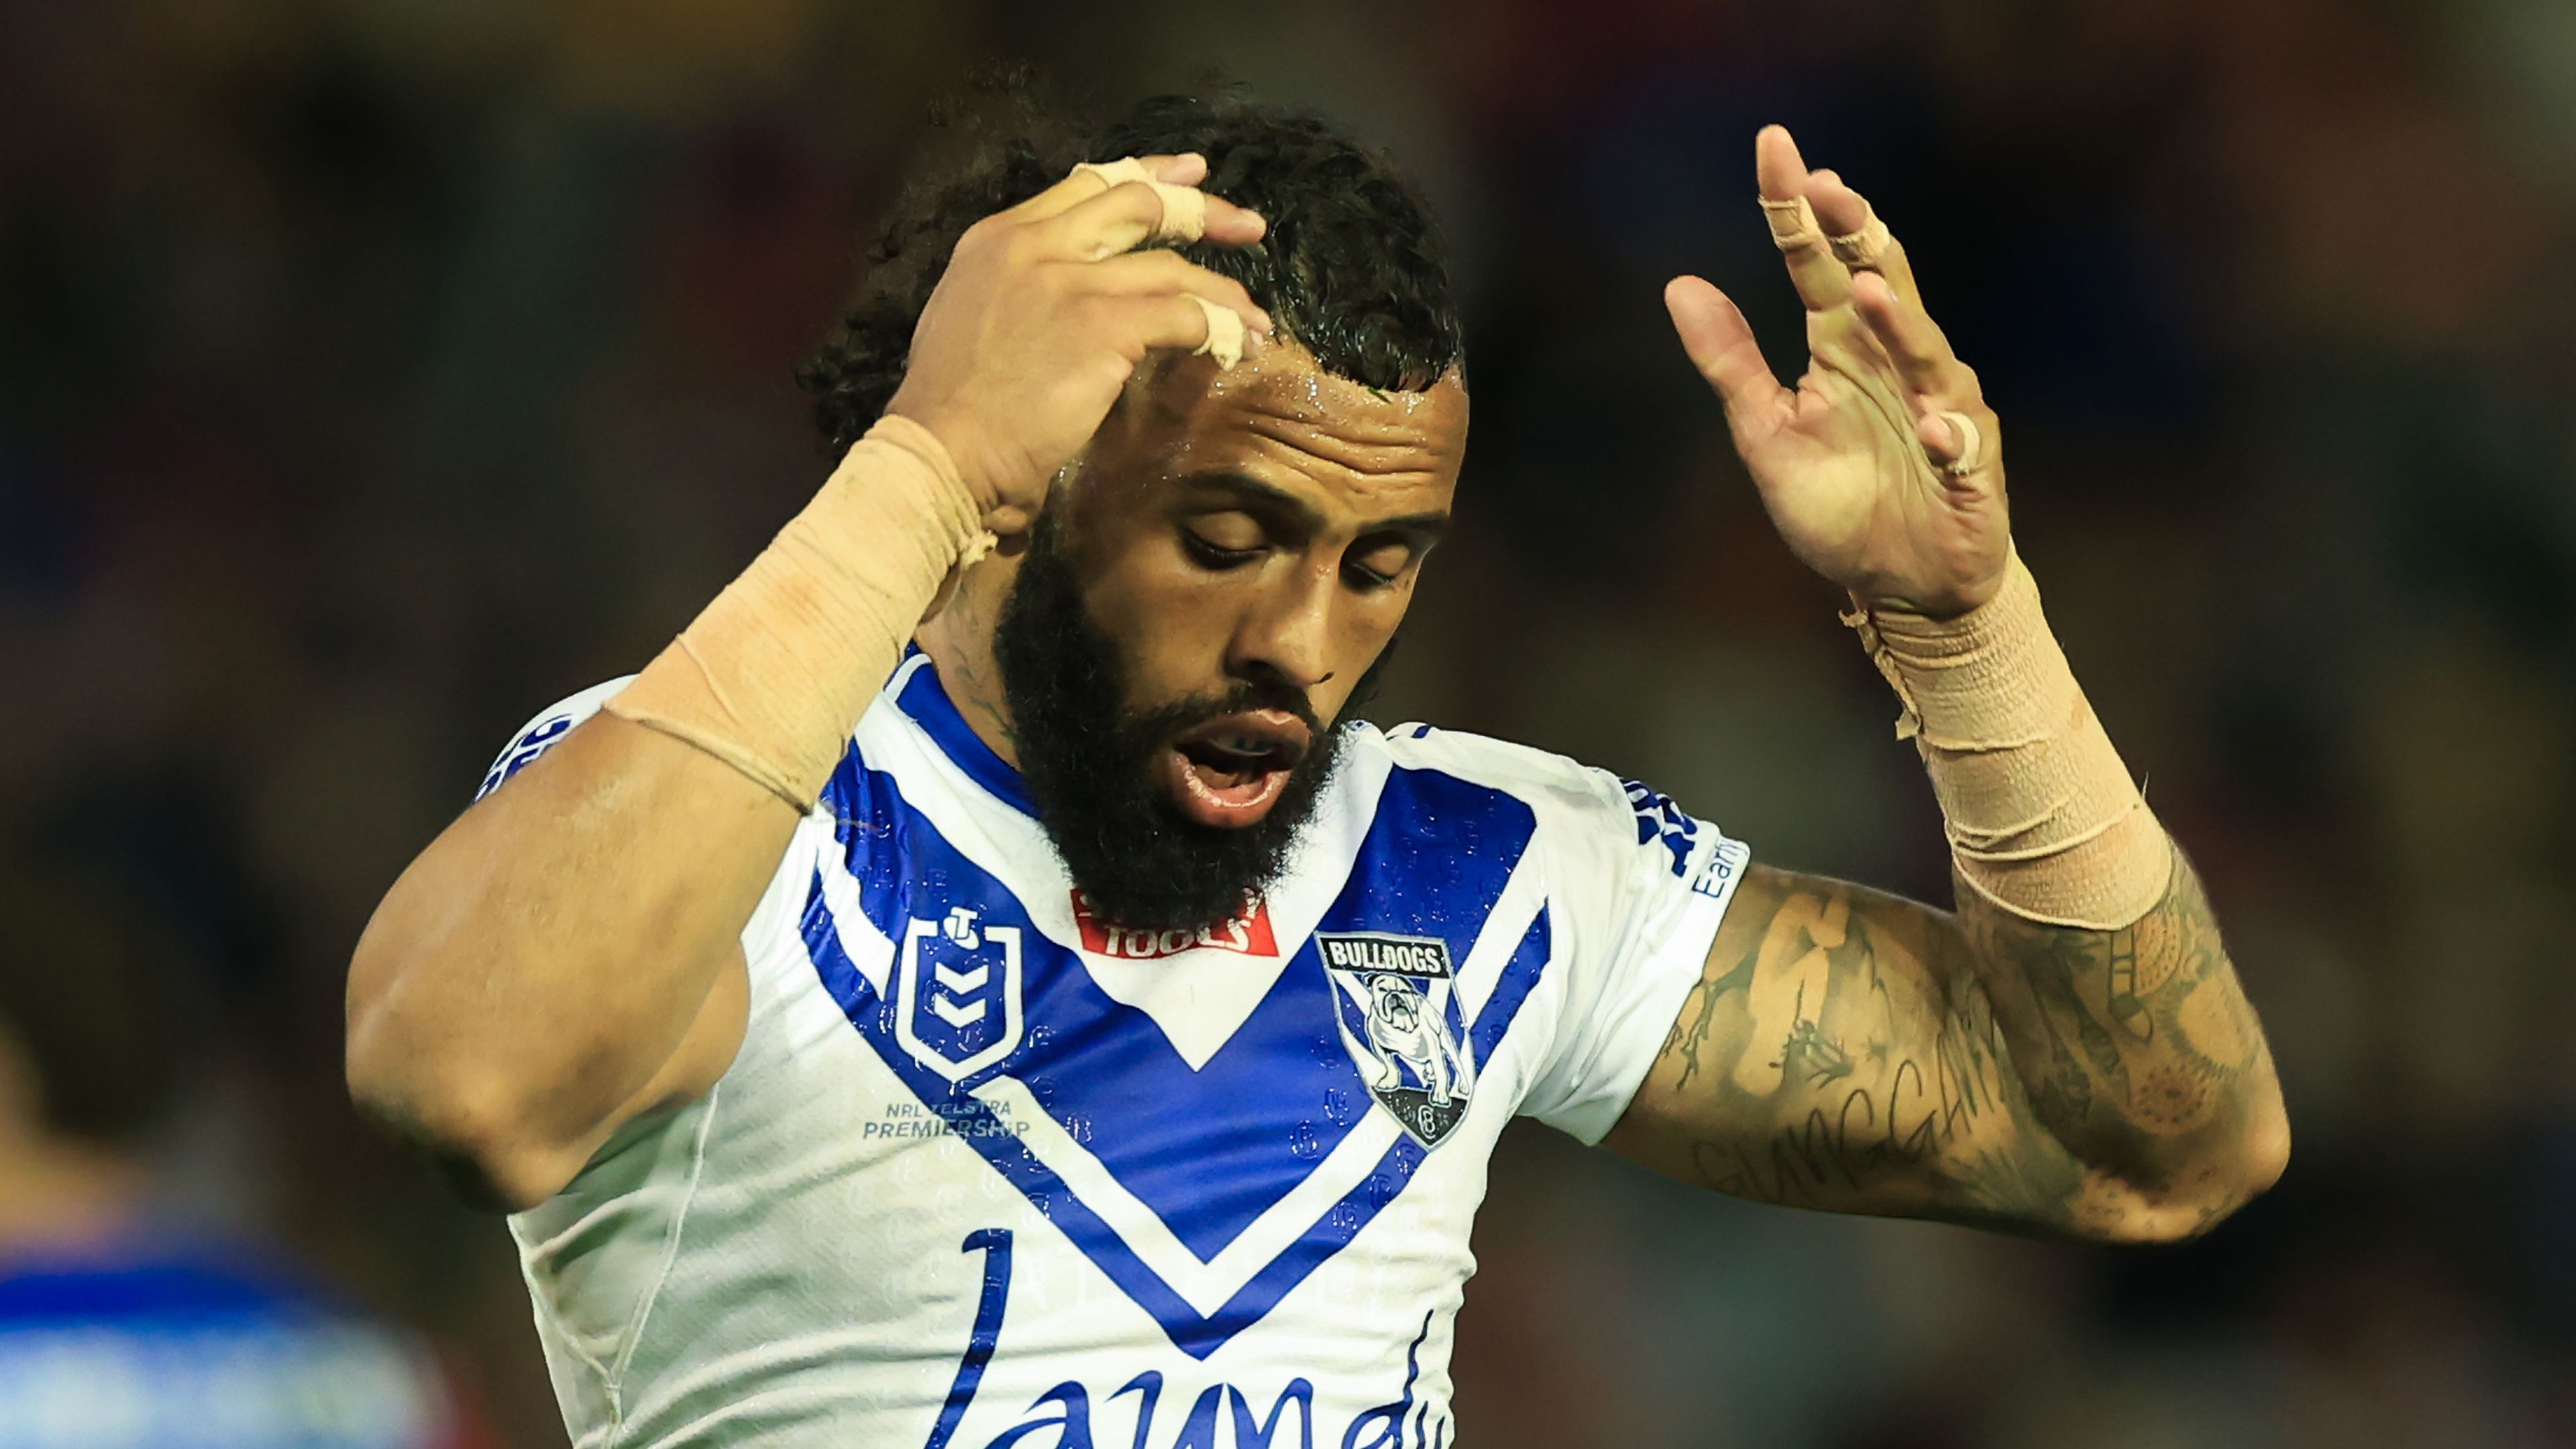 A dejected Josh Addo-Carr of the Bulldogs during the round 24 NRL match between Newcastle Knights and Canterbury Bulldogs at McDonald Jones Stadium on August 13, 2023 in Newcastle, Australia. (Photo by Jenny Evans/Getty Images)